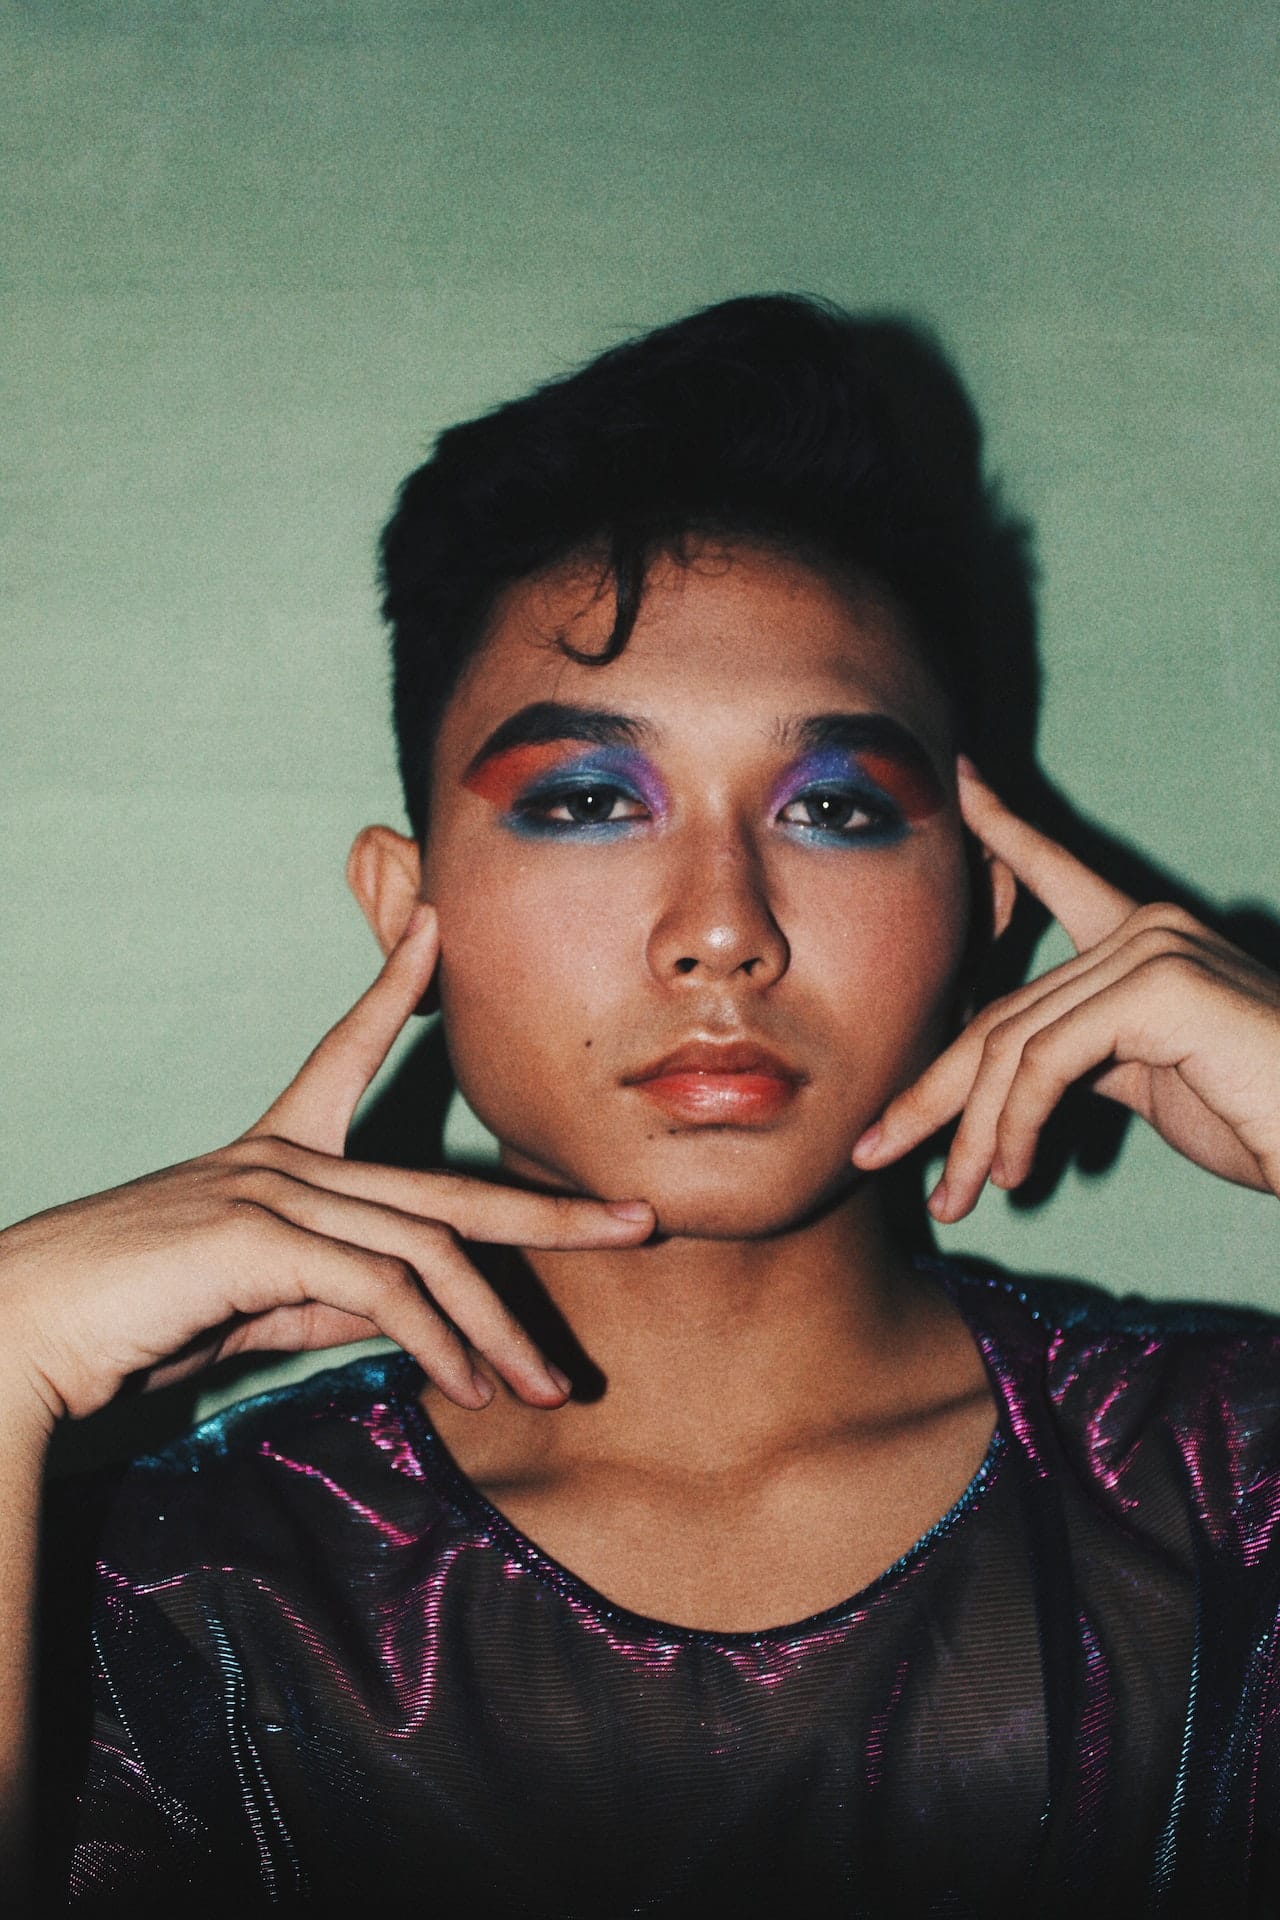 A close up photo of a young queer person with brown skin and dark short hair. They are wearing brightly colored eye makeup and framing their face with their hands.